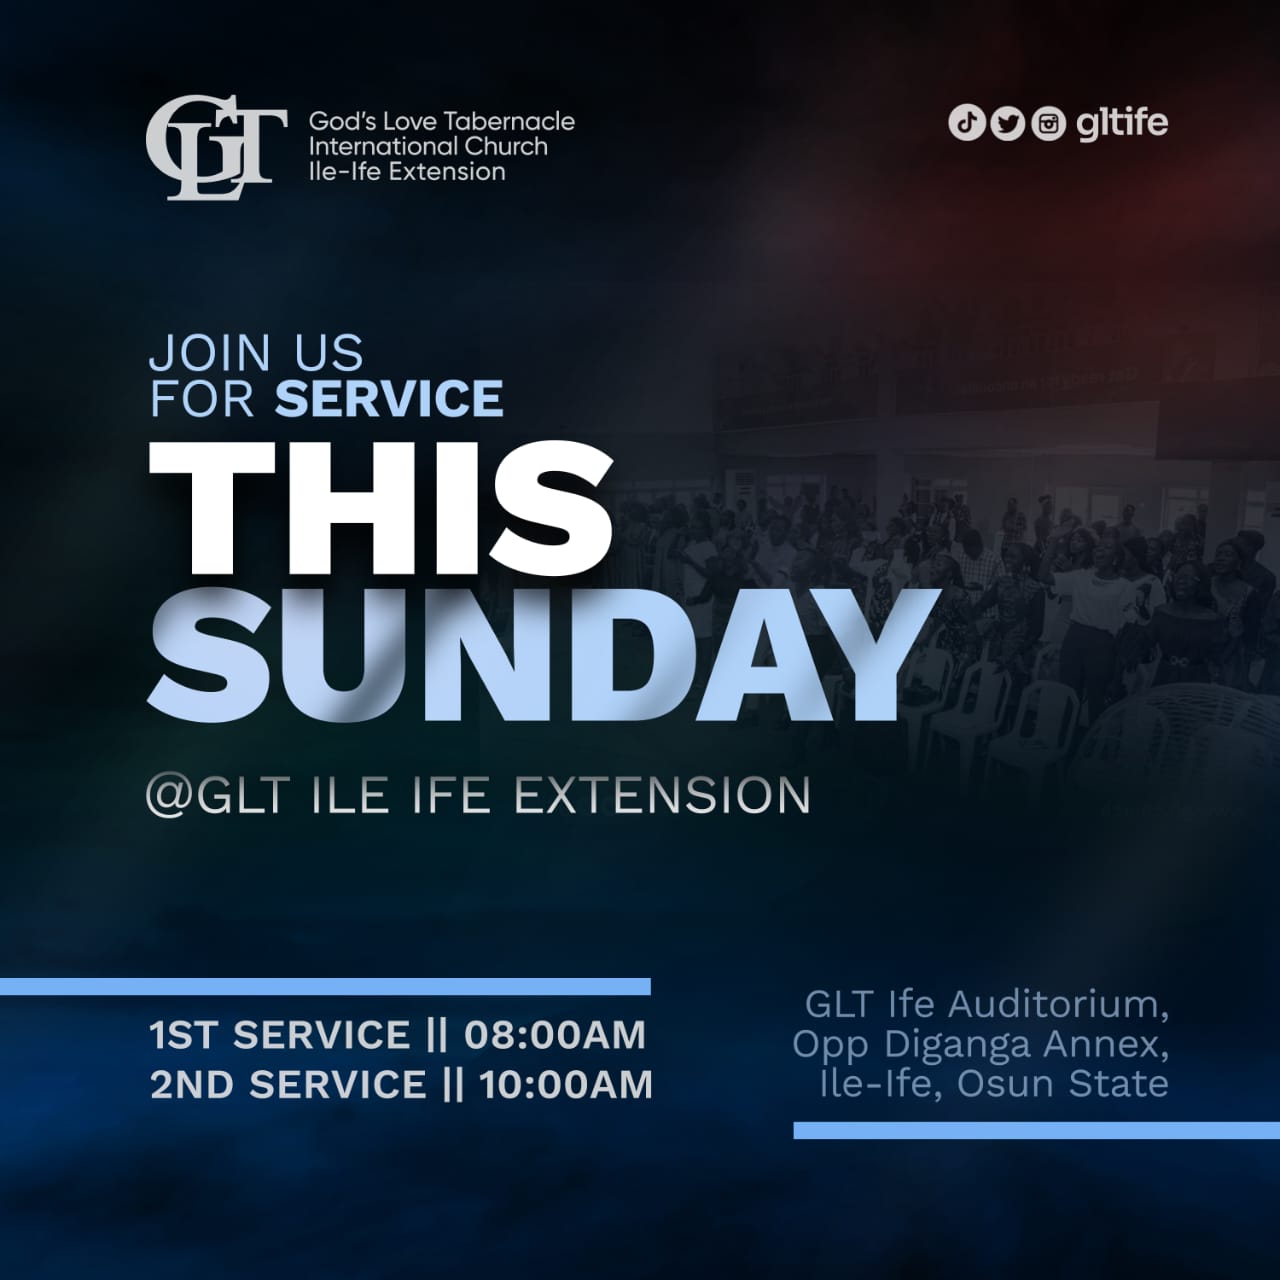 GLT IFE on X: It's another Sunday to dig deeper into our new